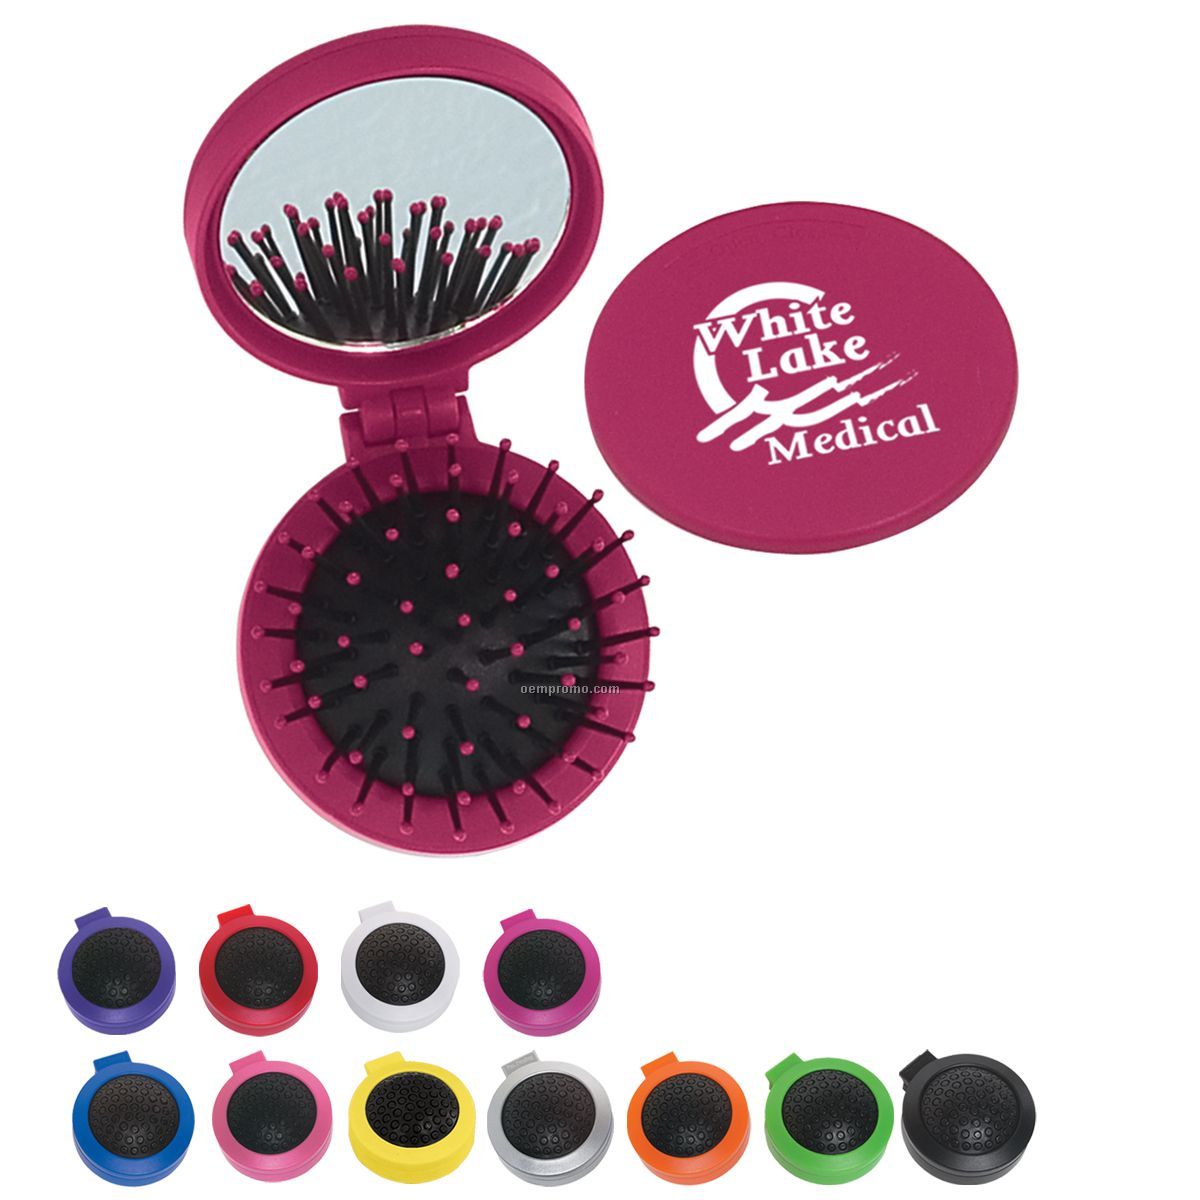 2-in-1 Kit W/ Mirror & Hair Brush (Colored)